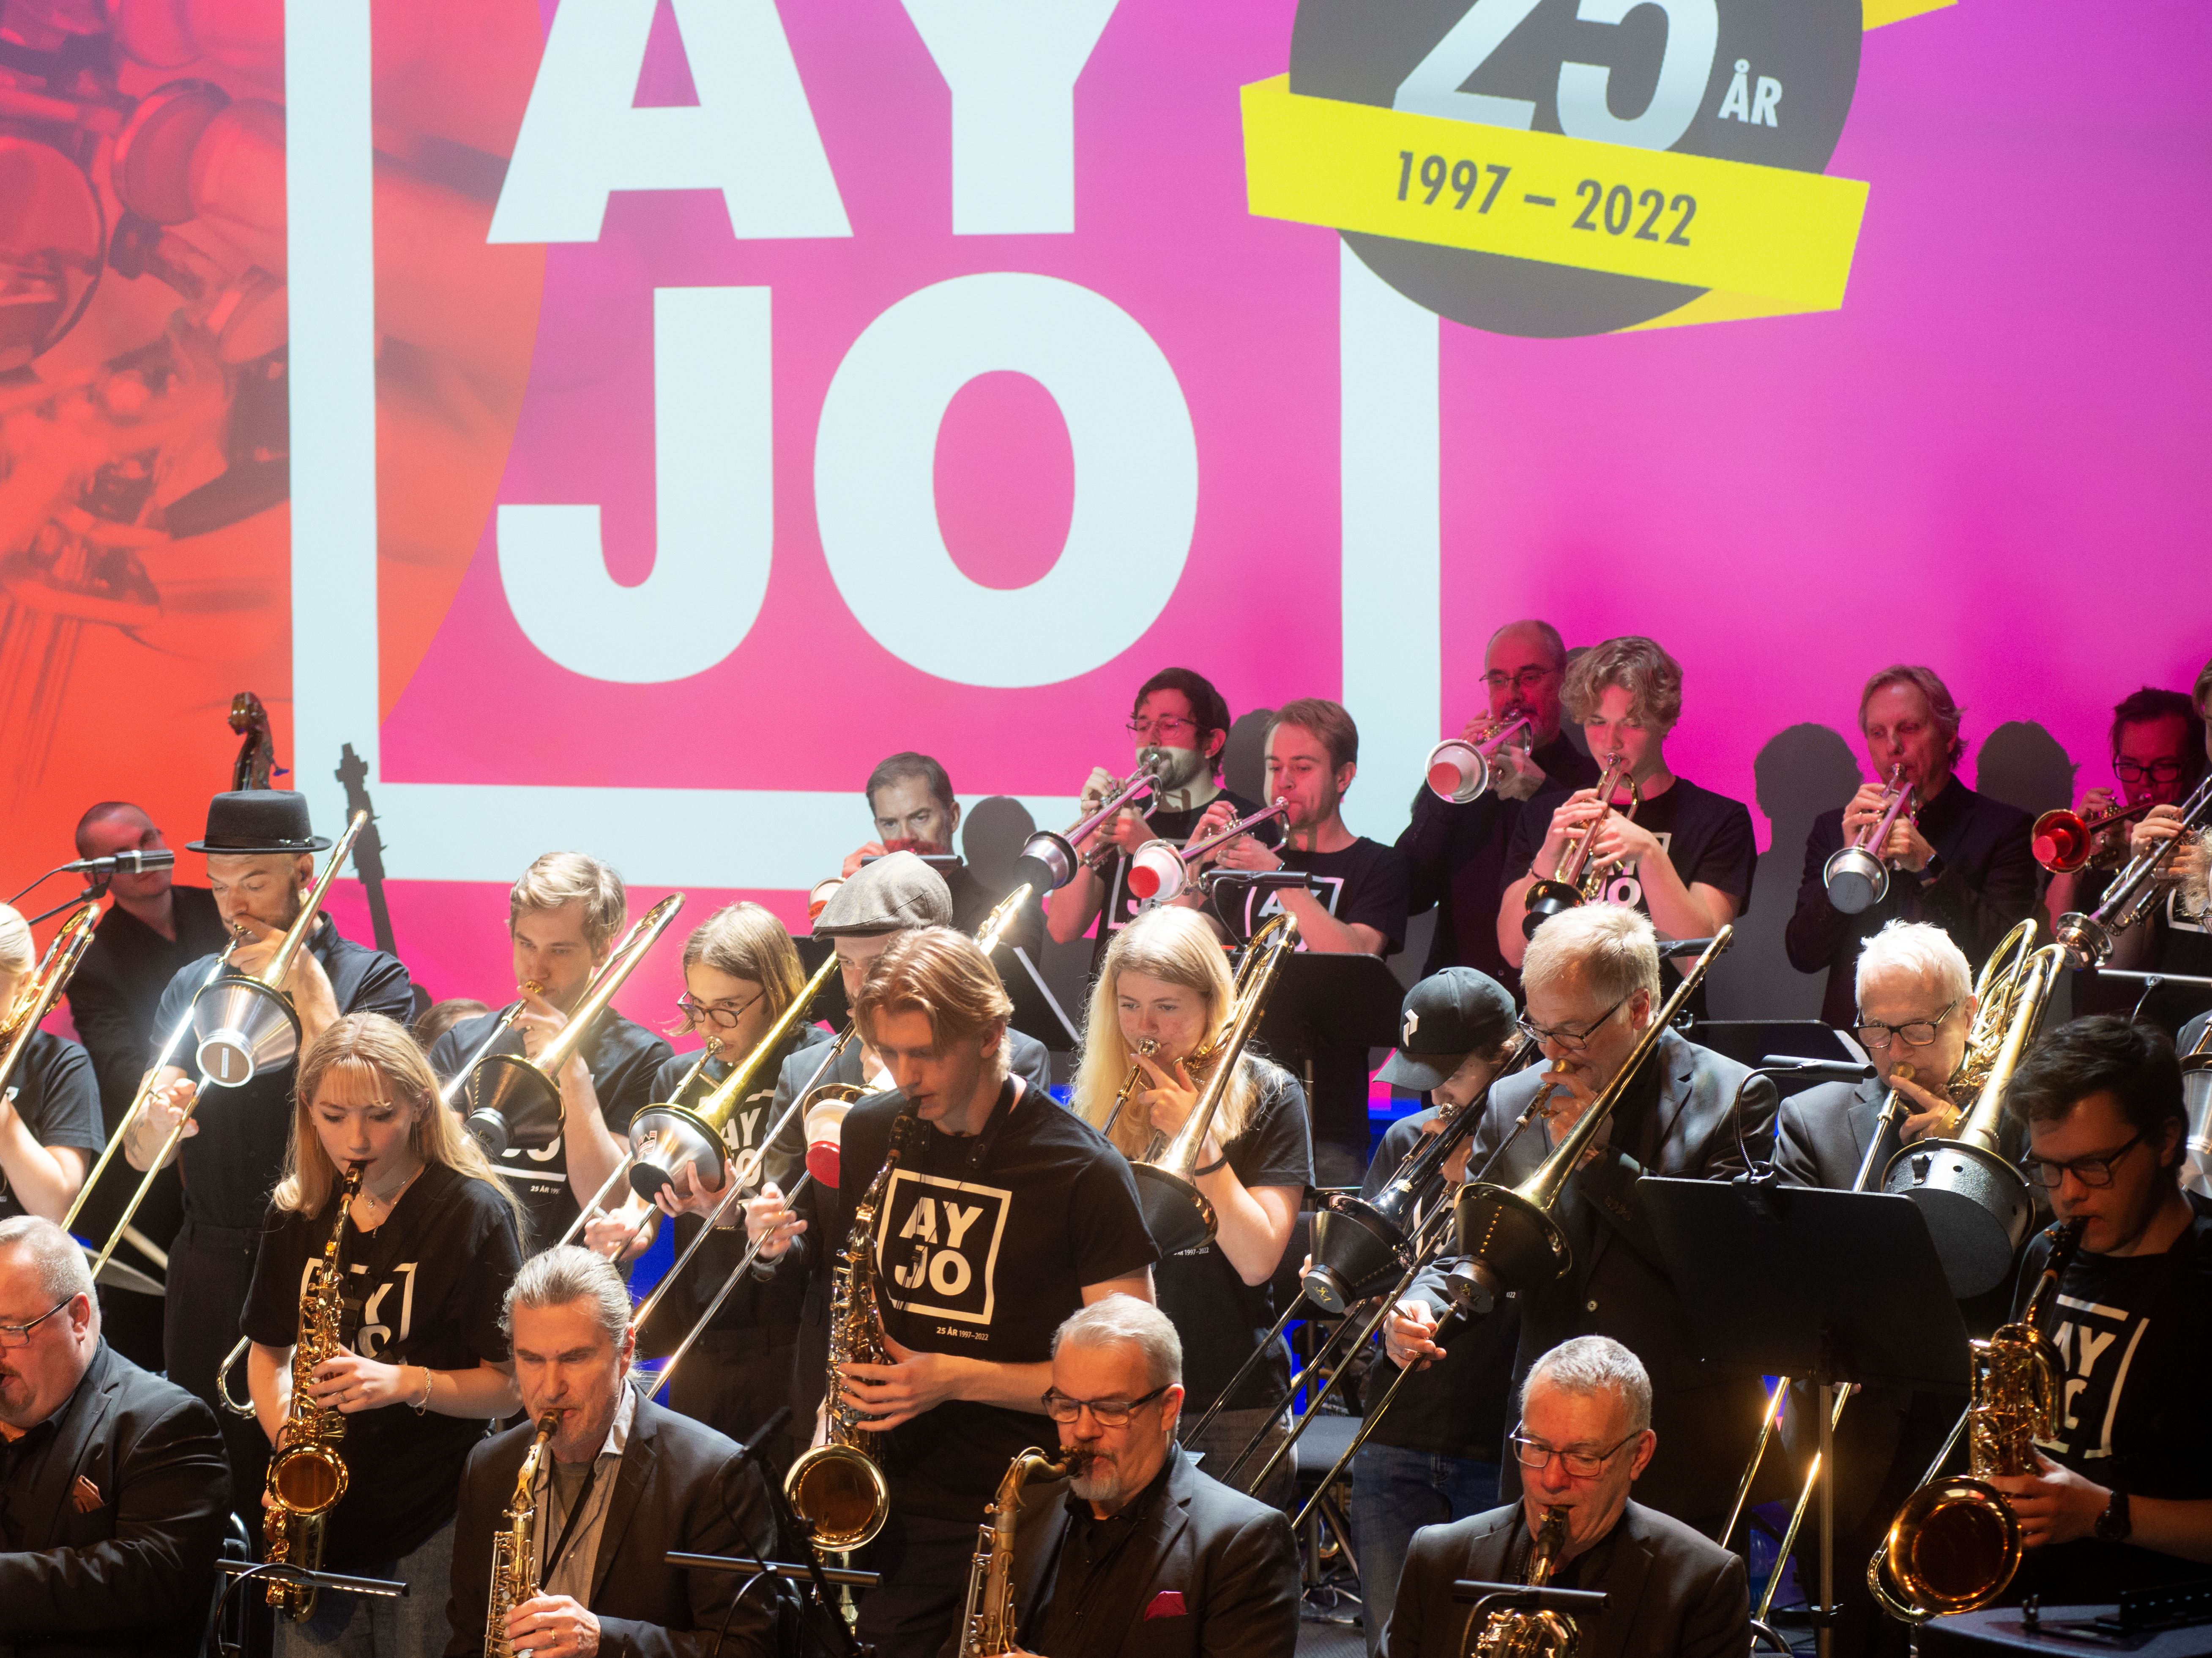 Arctic Youth Jazz Orchestra